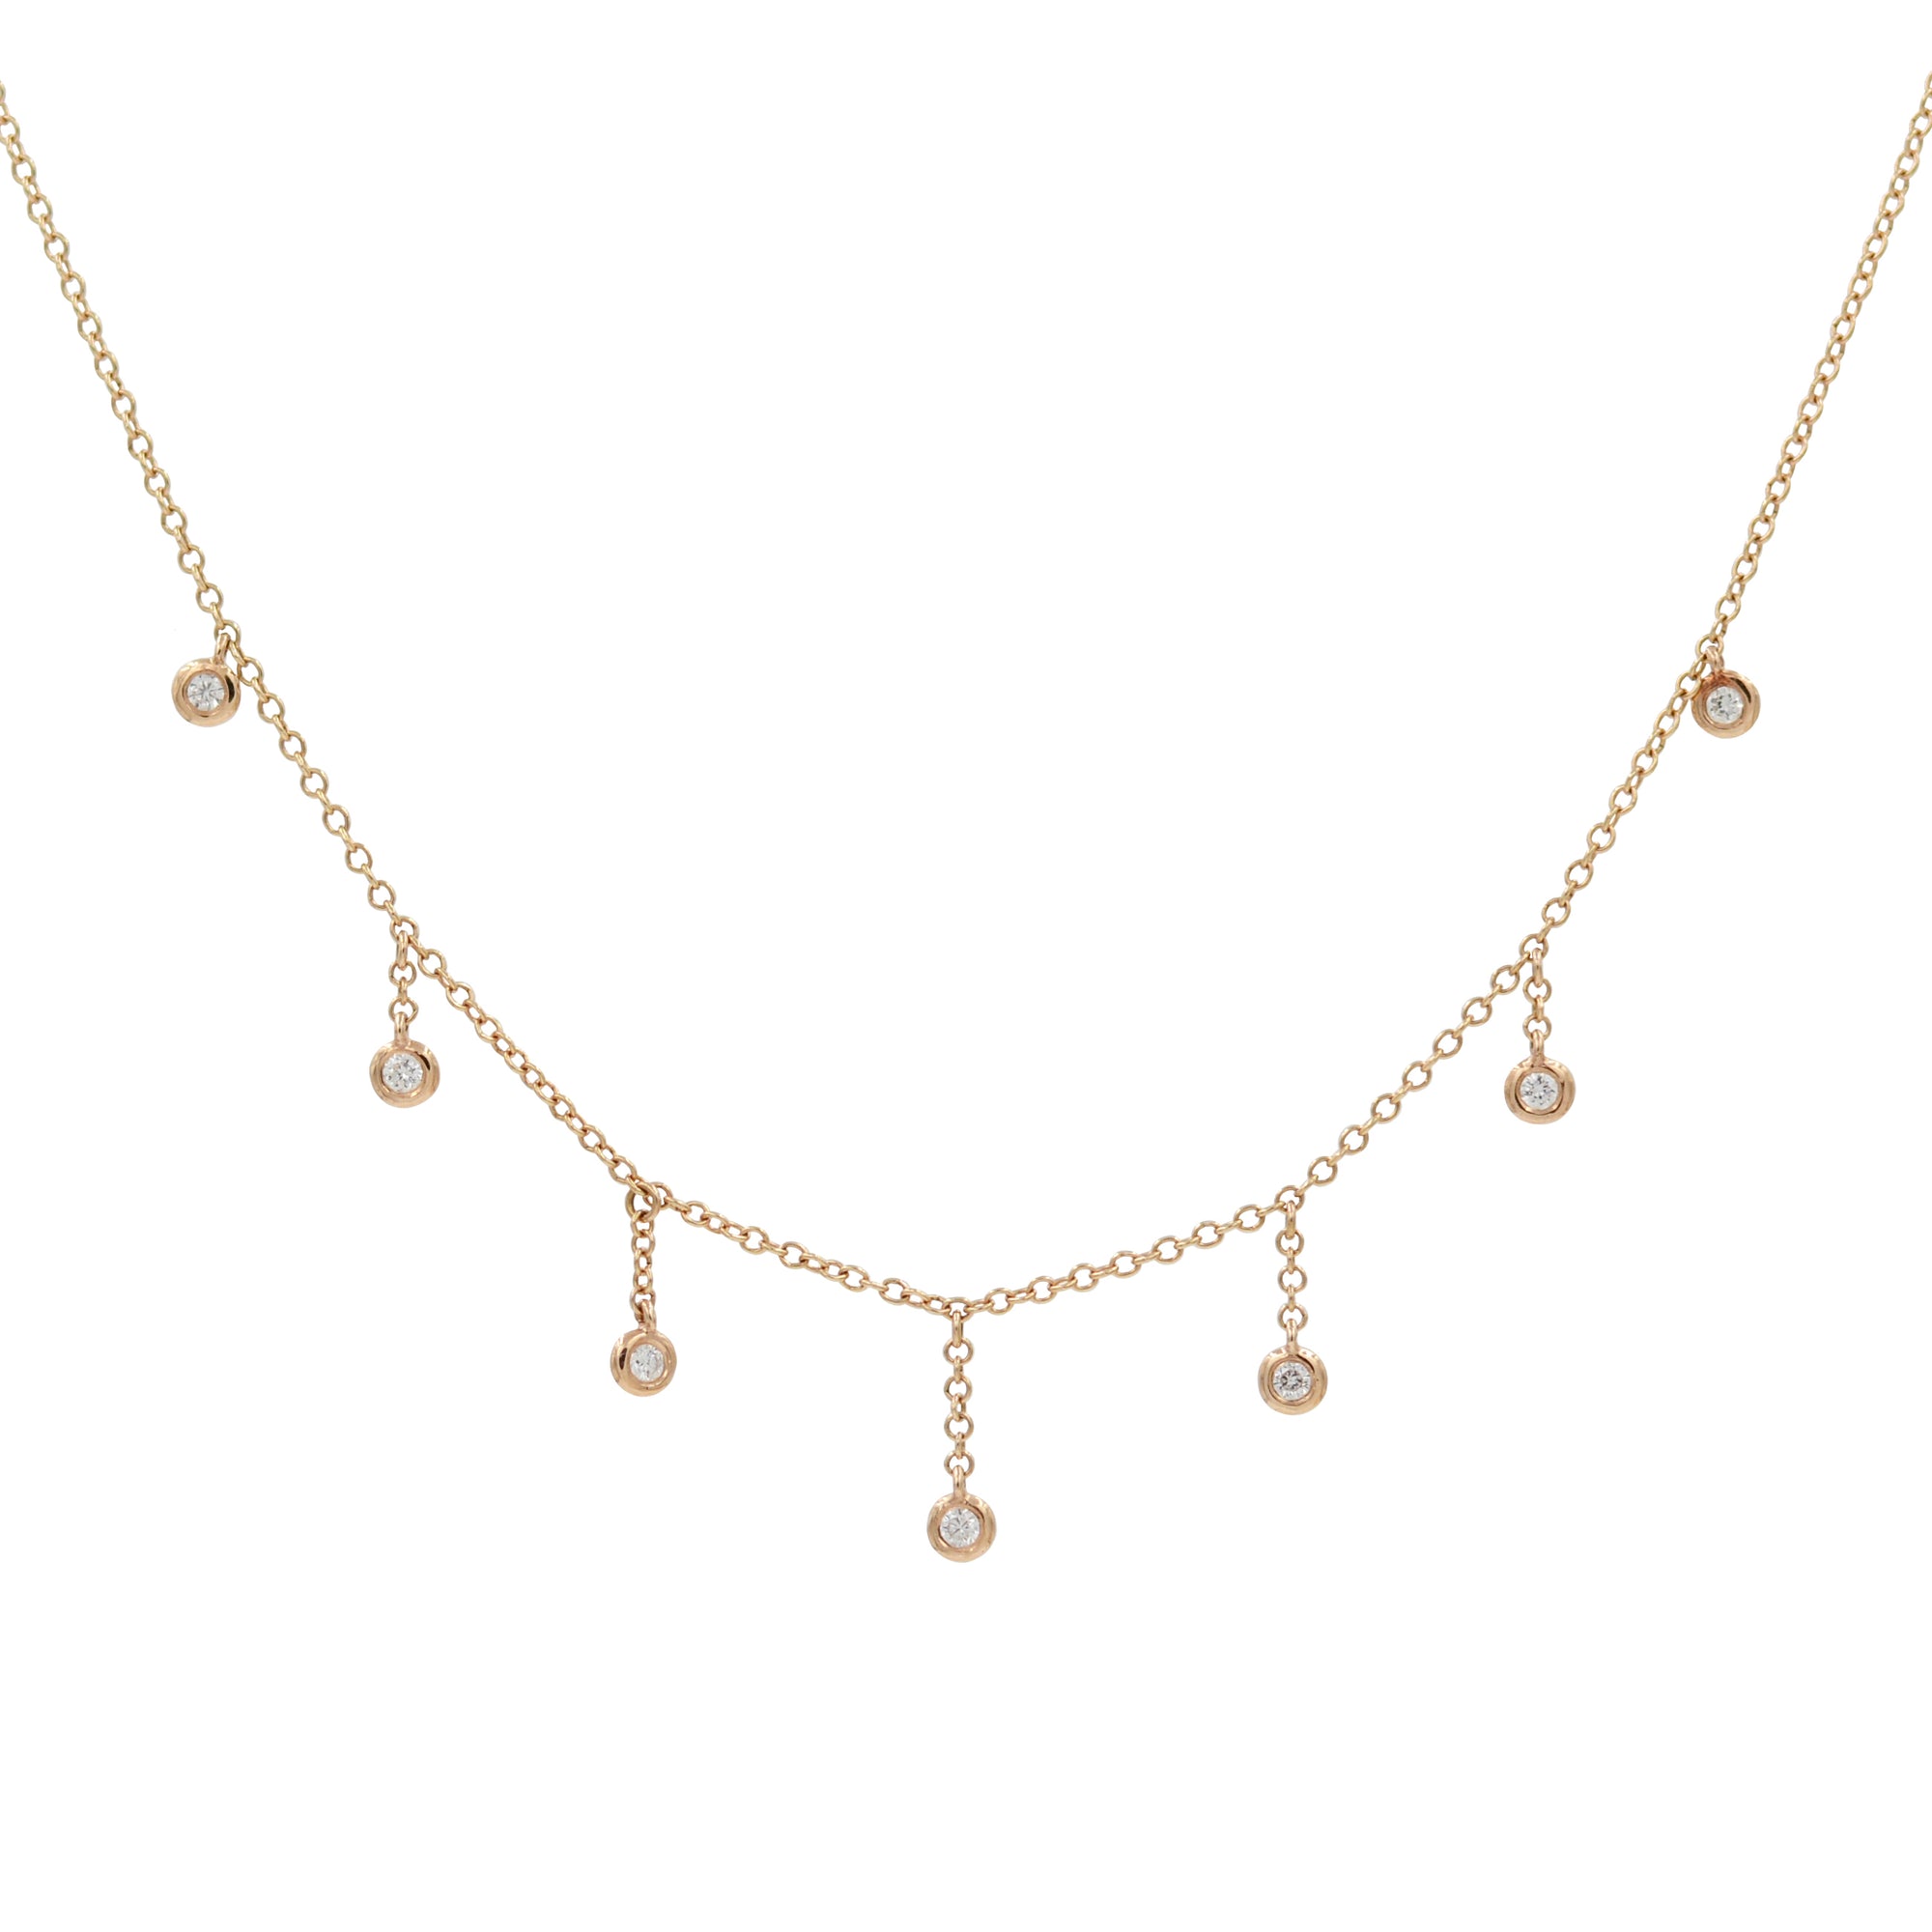 Raindrop Choker Necklace With Diamonds in 14k Rose Gold - KAMARIA